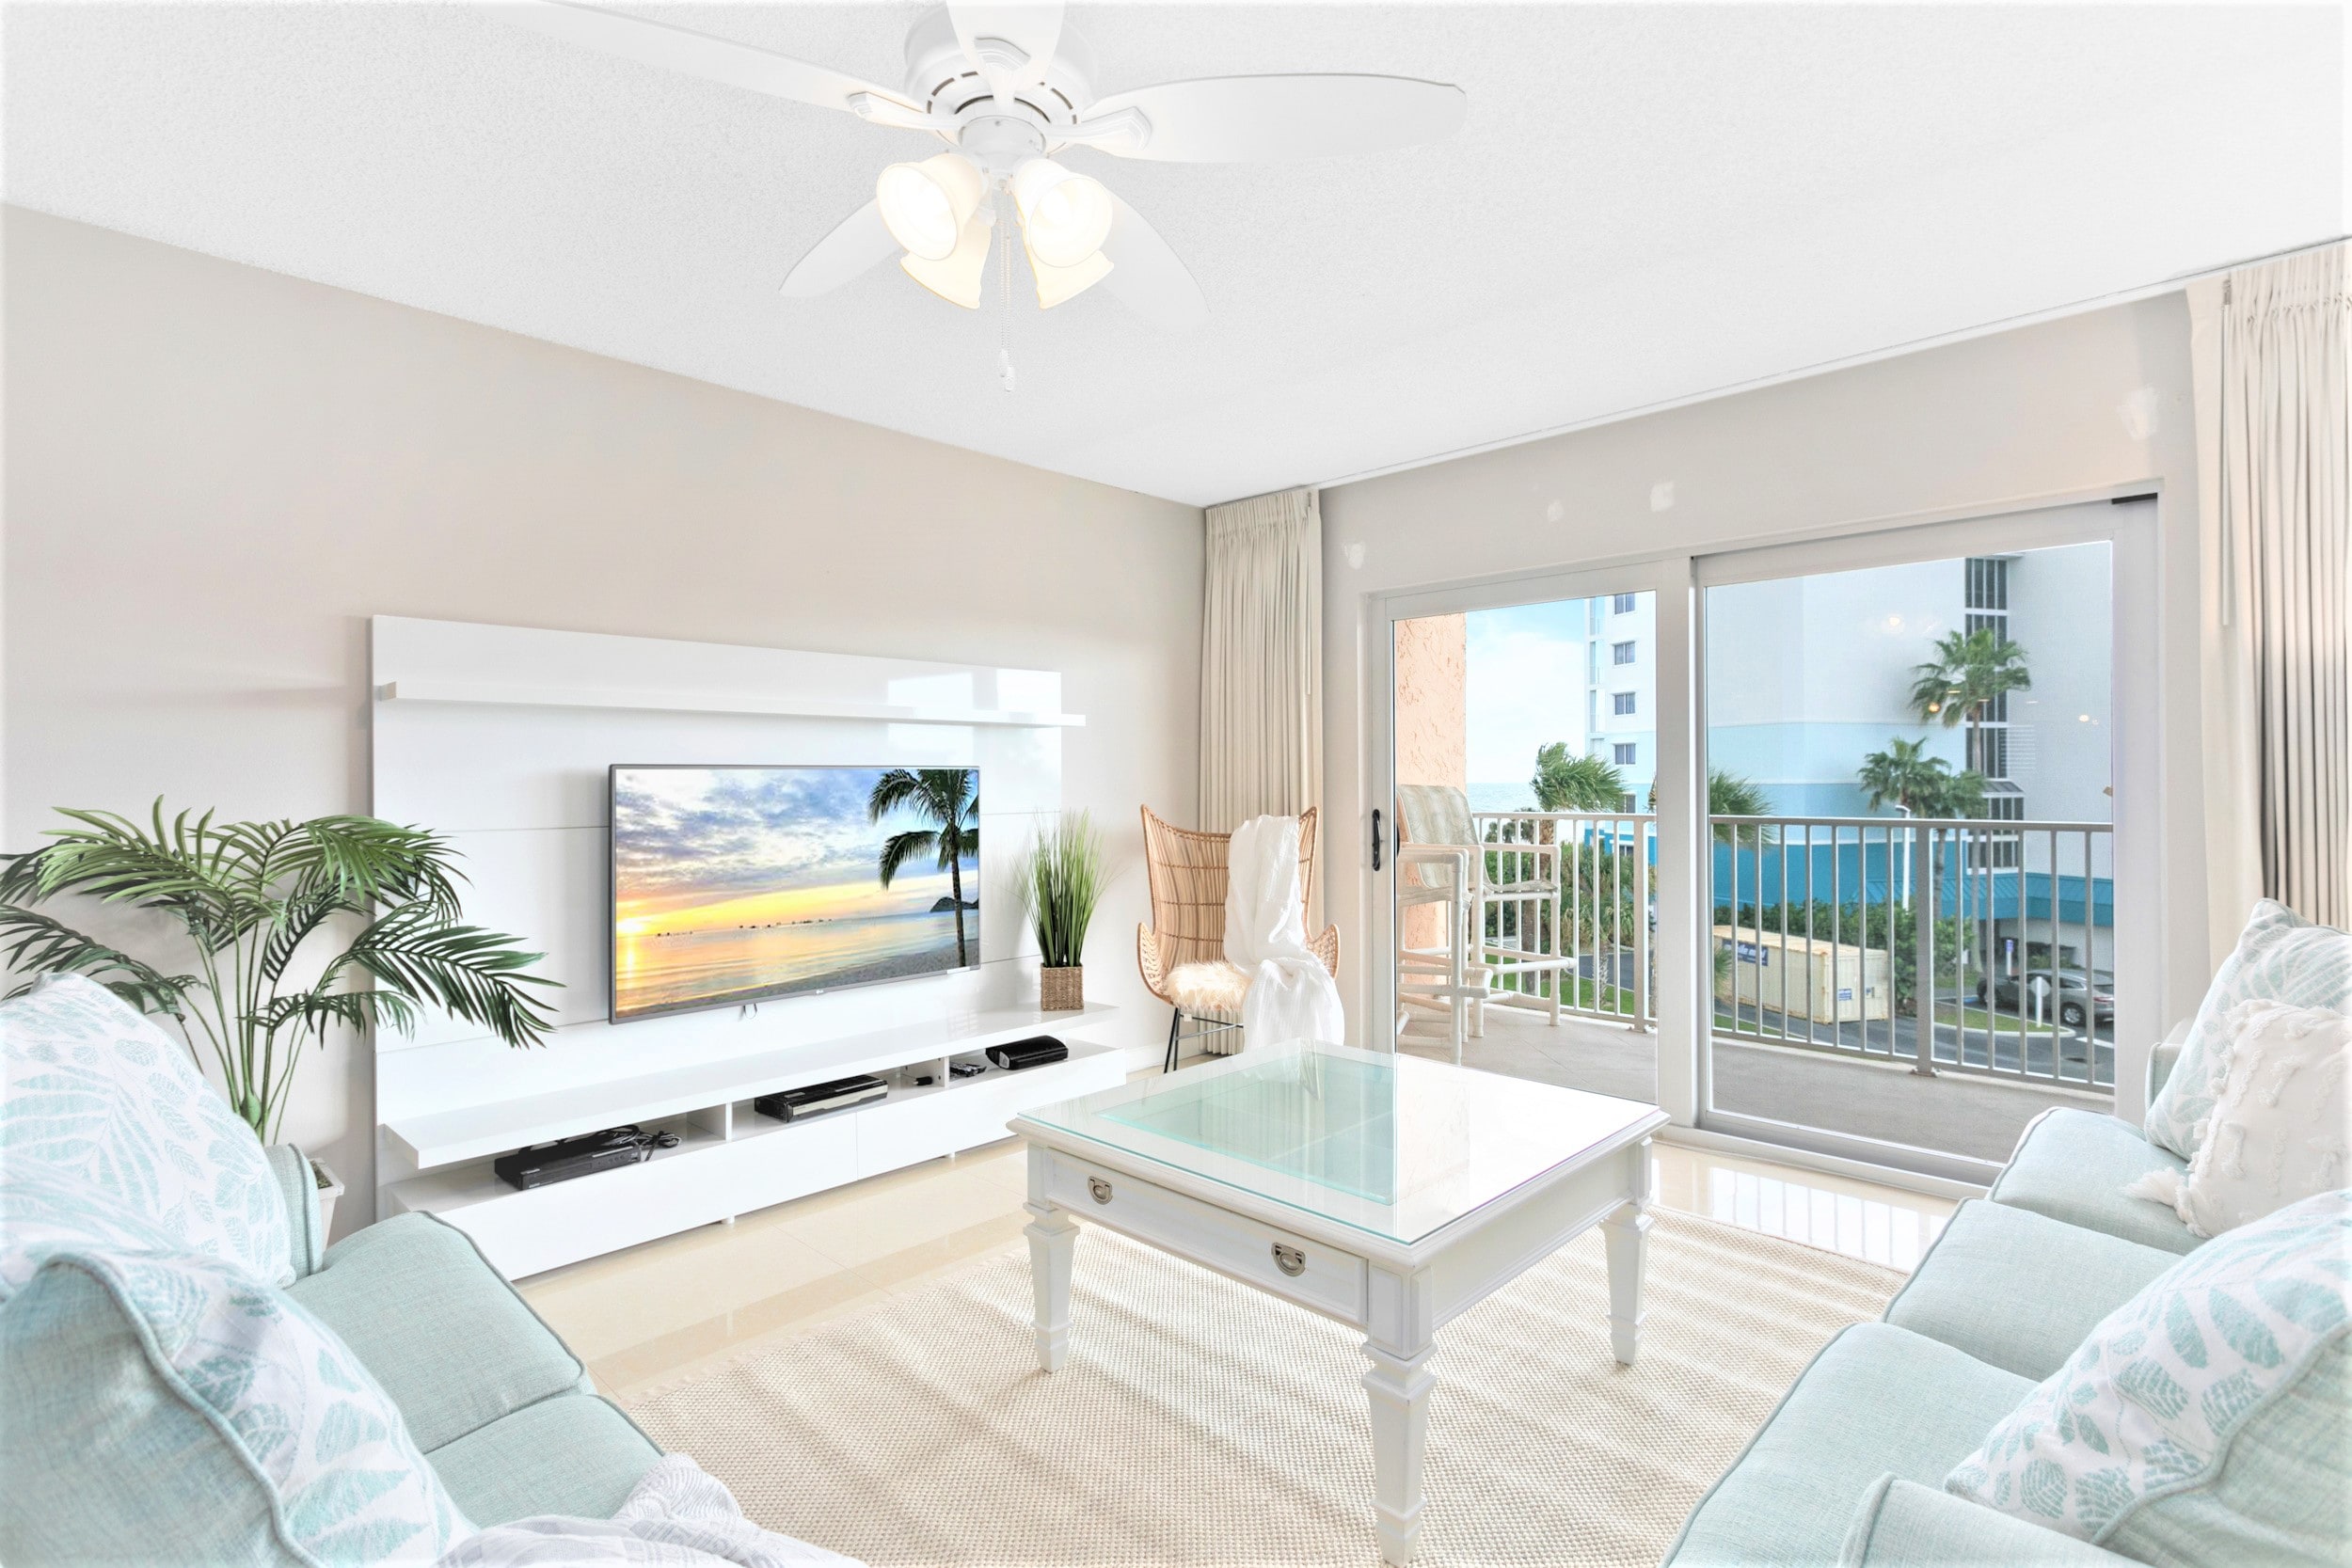 Spacious living room with 60" LCD TV, sleeper sofa, walks out onto massive private balcony with view of the ocean